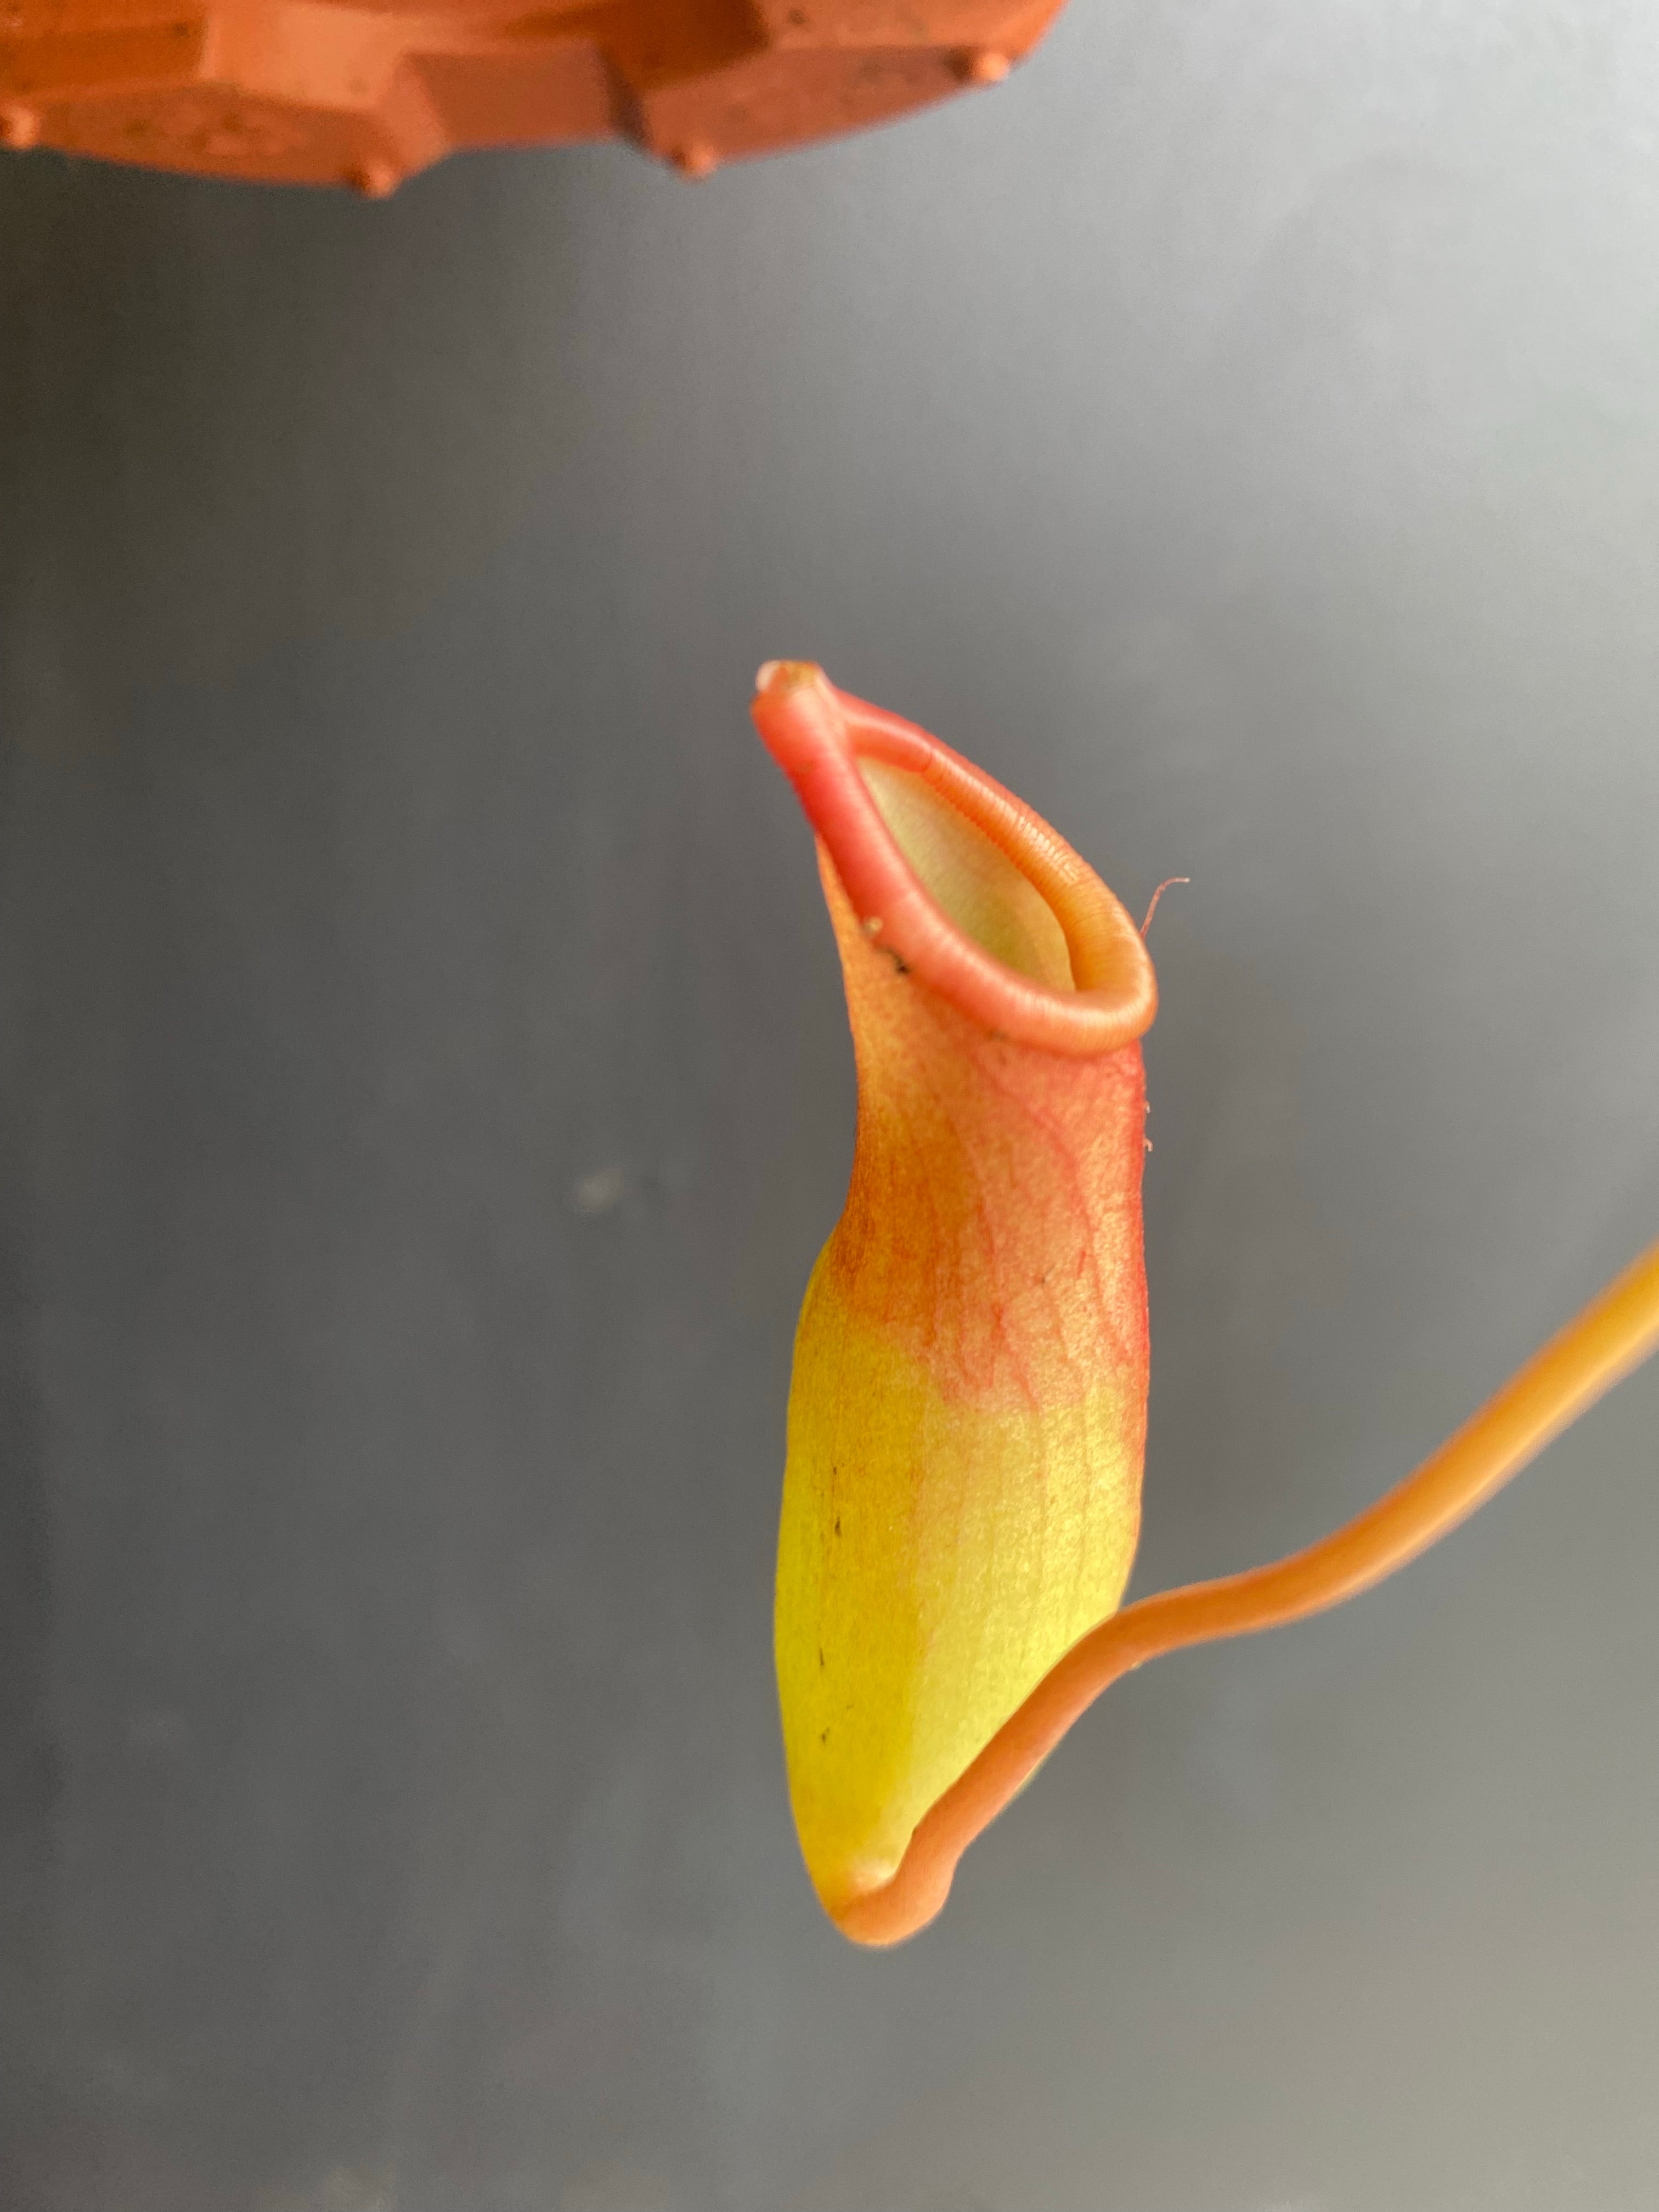 Pitcher Plant (Nepenthes x ventrata)